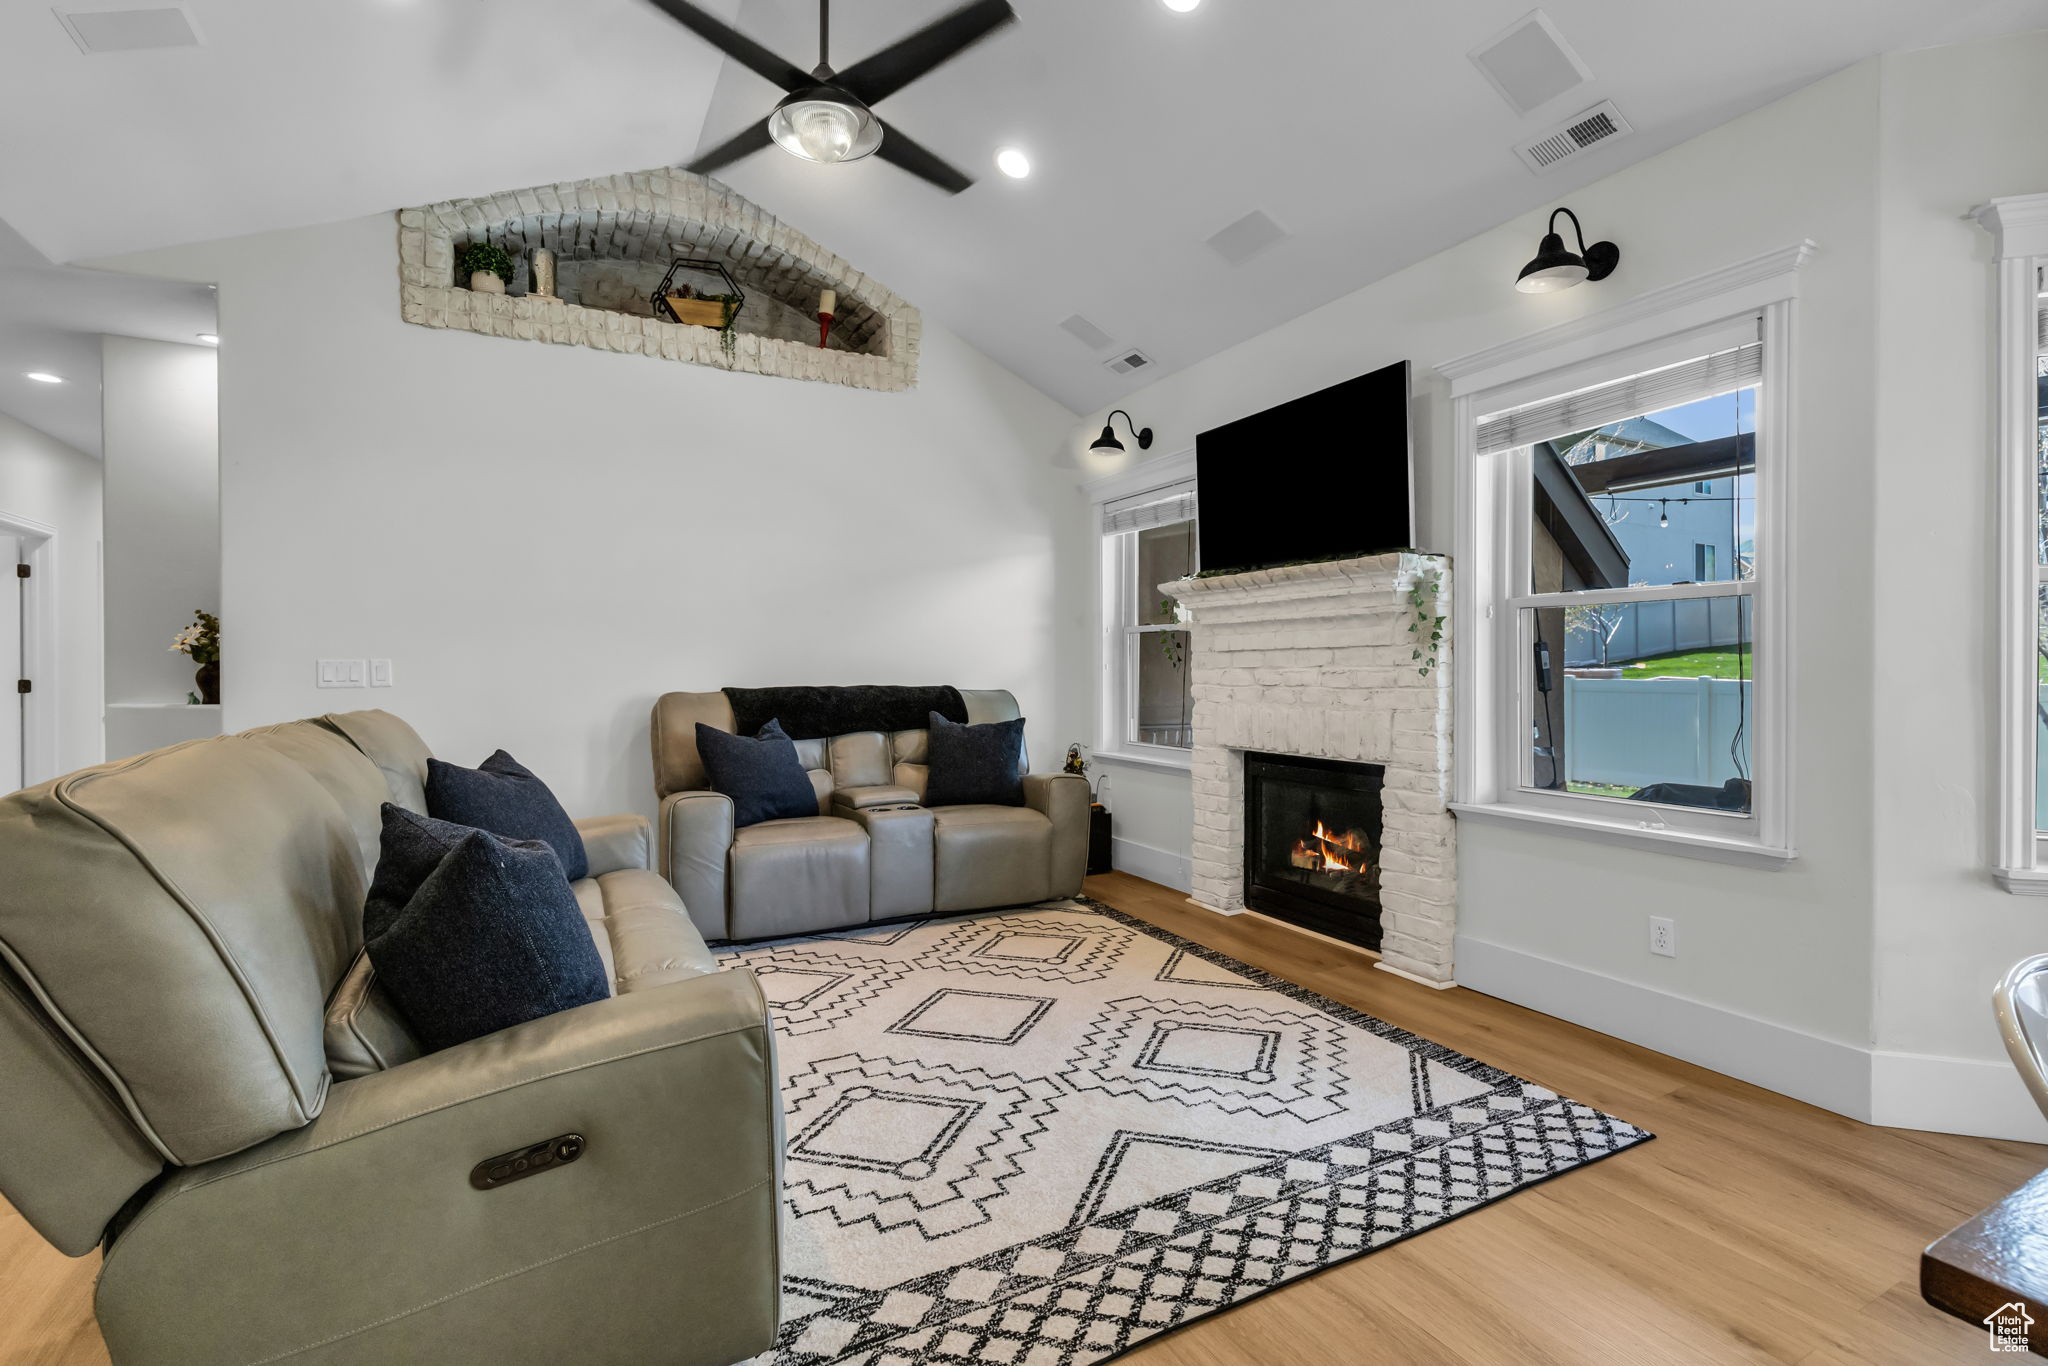 Living room with ceiling fan, a fireplace, vaulted ceiling, and light hardwood / wood-style floors